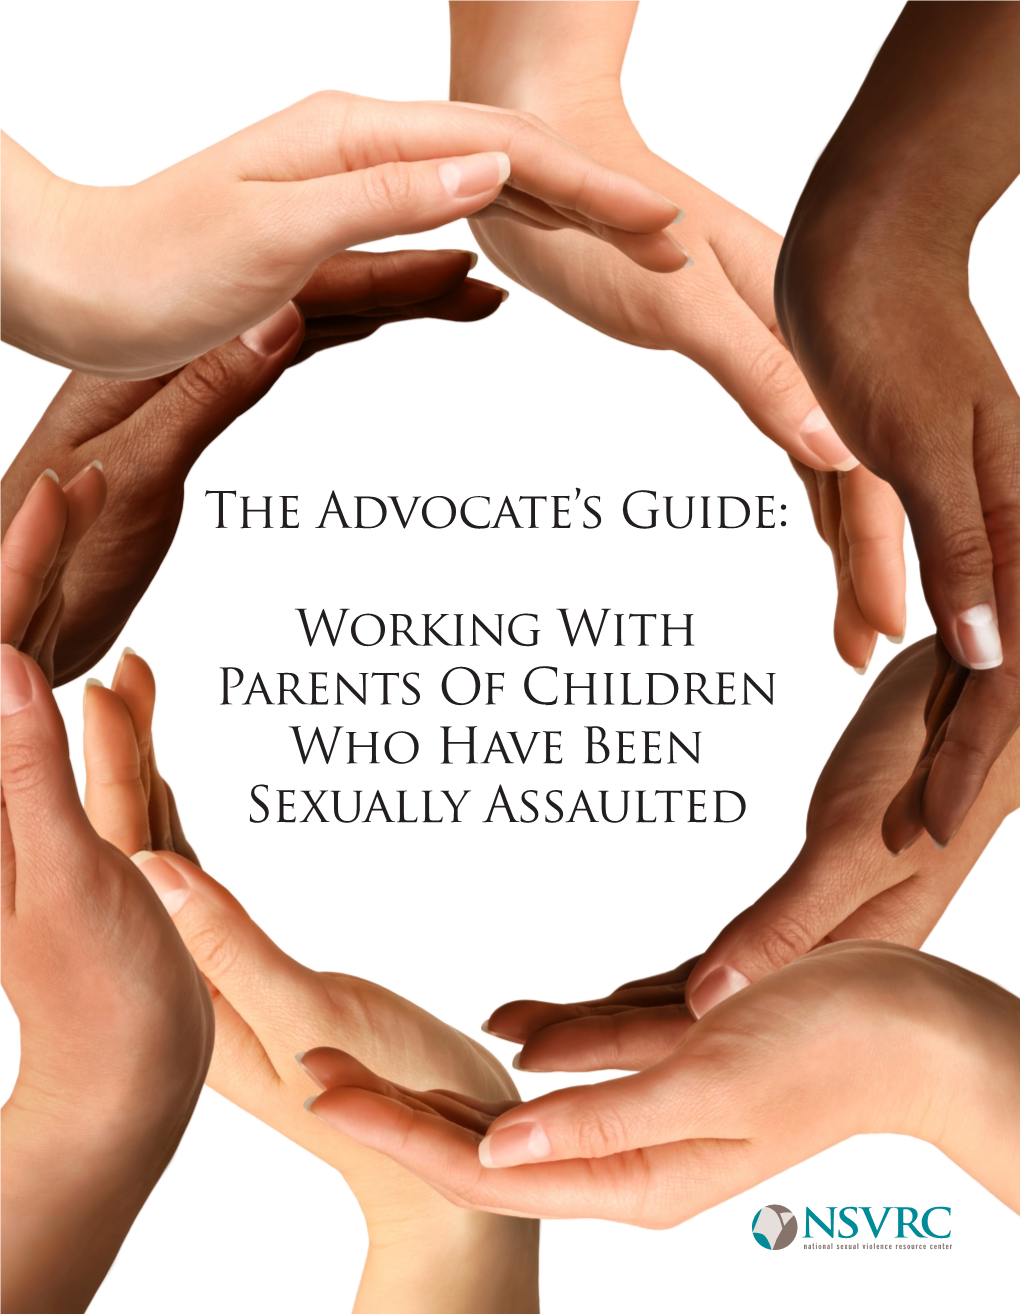 Working with Parents of Children Who Have Been Sexually Assaulted the ADVOCATE’S GUIDE: Working with Parents of Children Who Have Been Sexually Assaulted